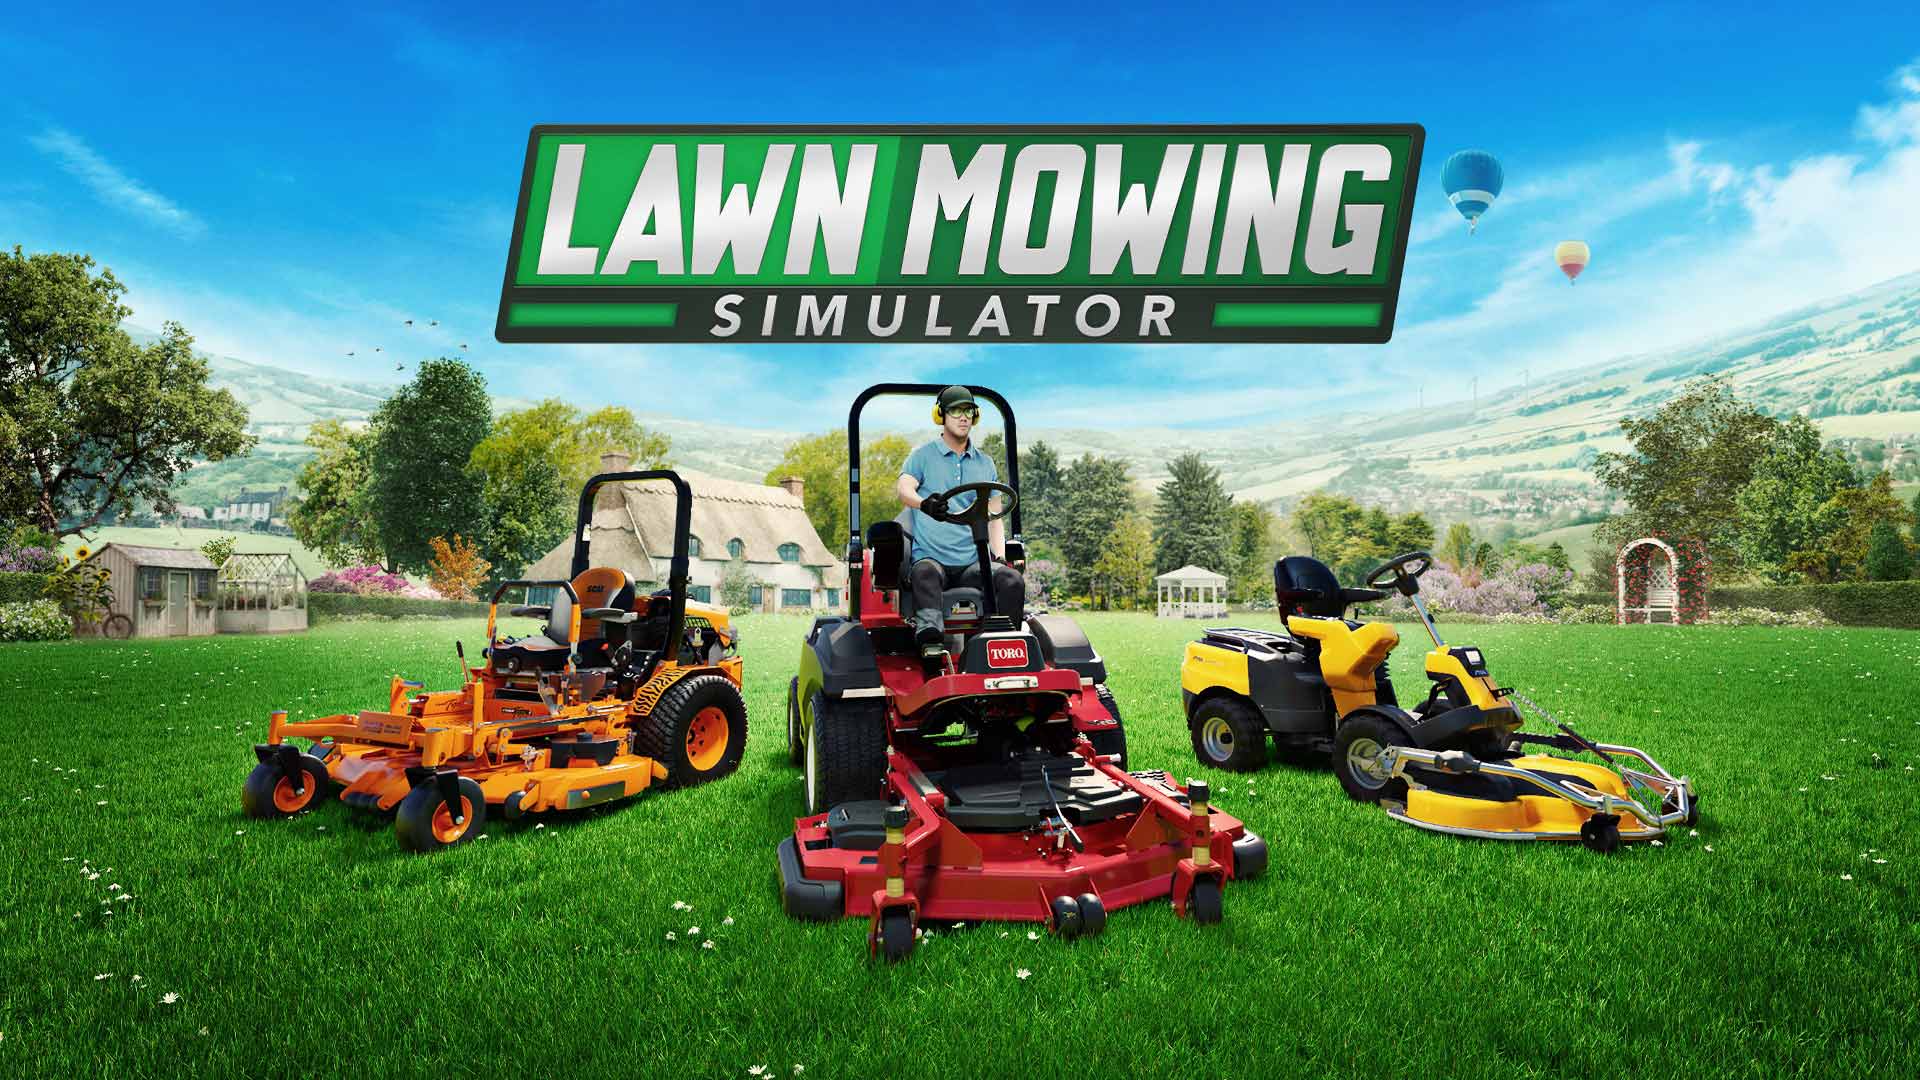 The Lawn Mowing Simulator preview kicks off Apr. 2, secure your spot